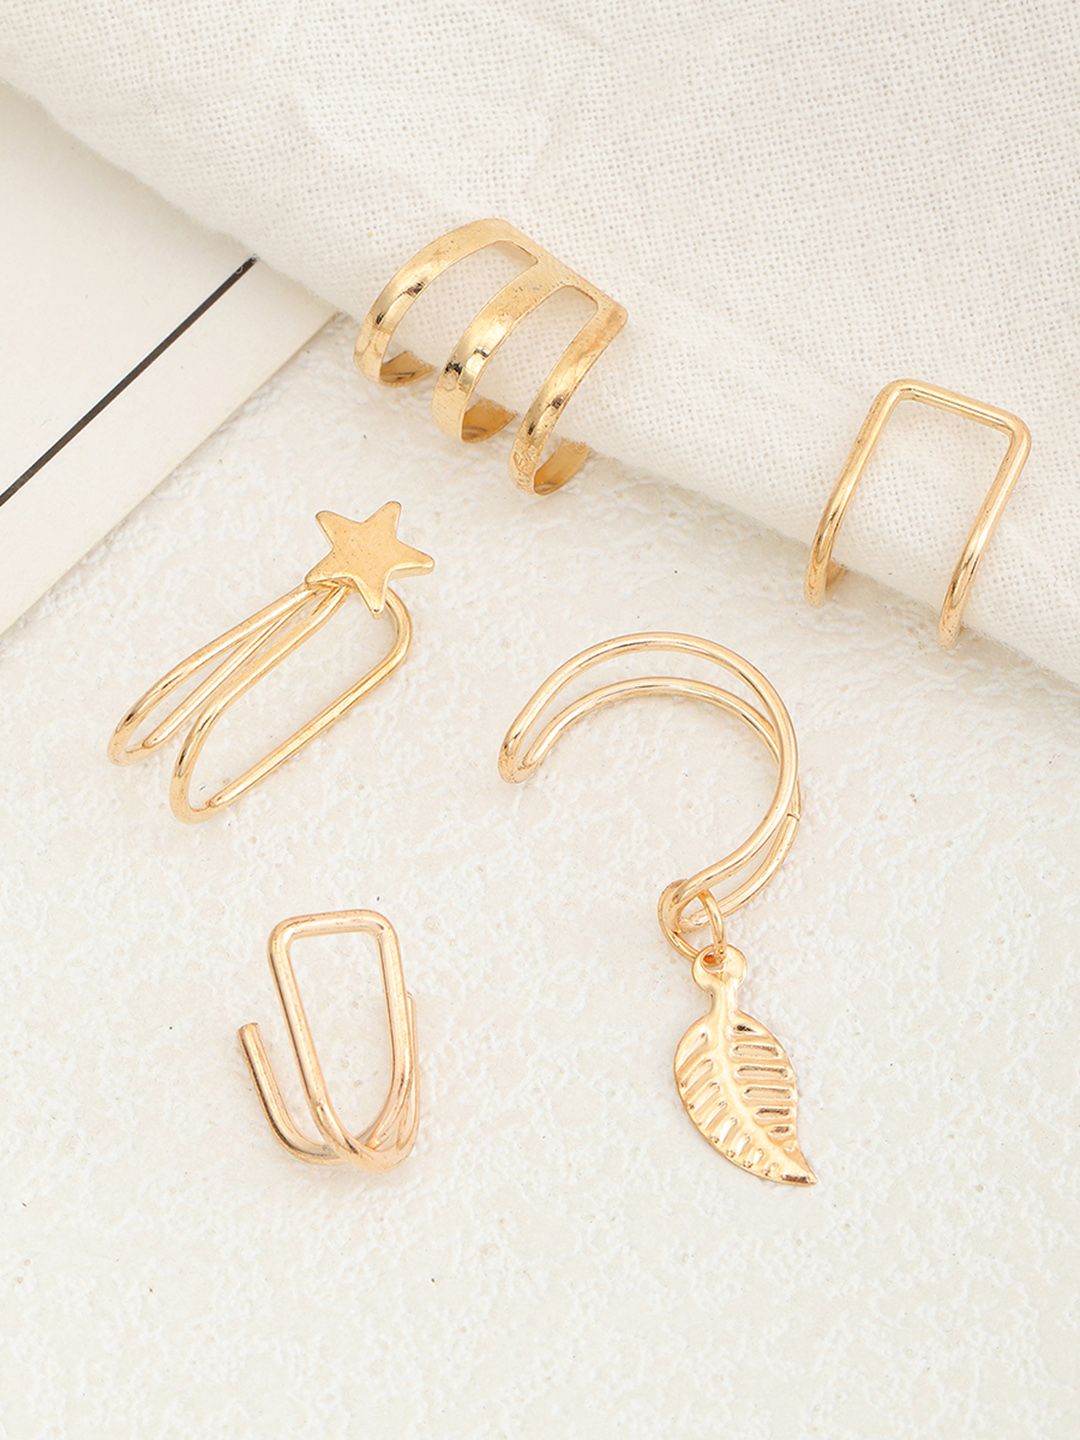 URBANIC Gold-Toned Set Of 5 Contemporary Ear Cuff Earrings Price in India